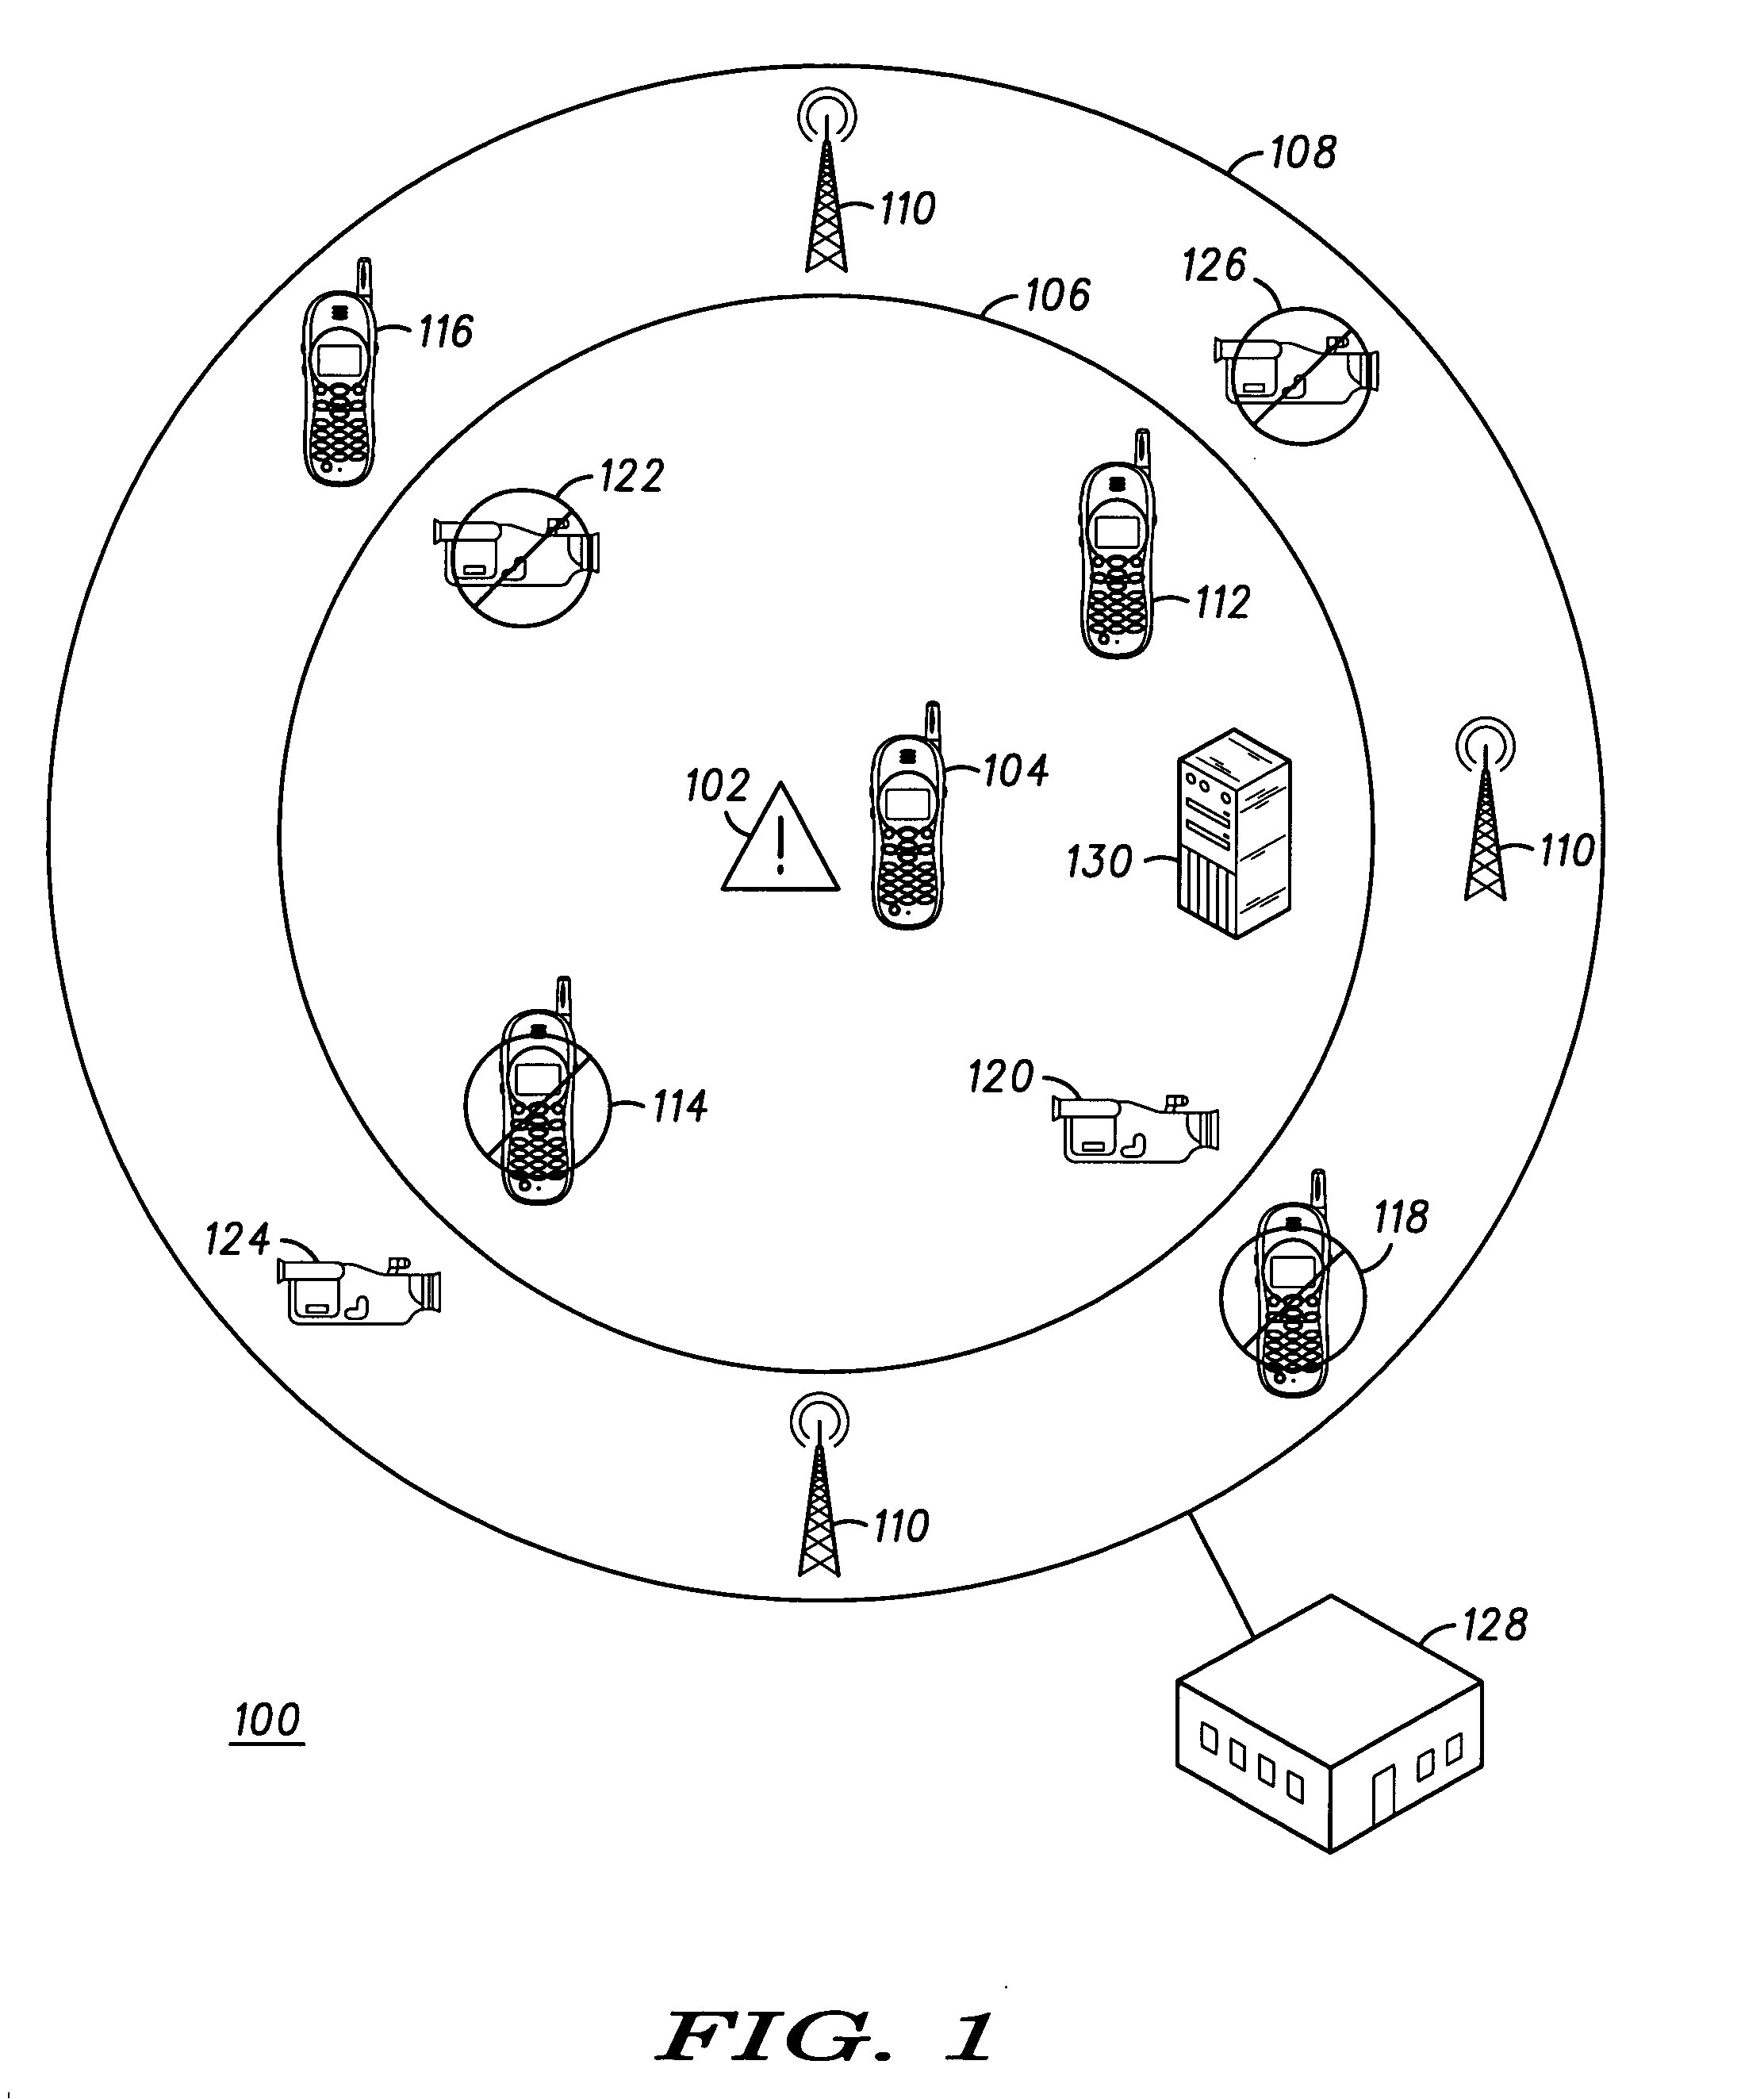 System and method for incident reporting, information gathering, reconstructing and alerting